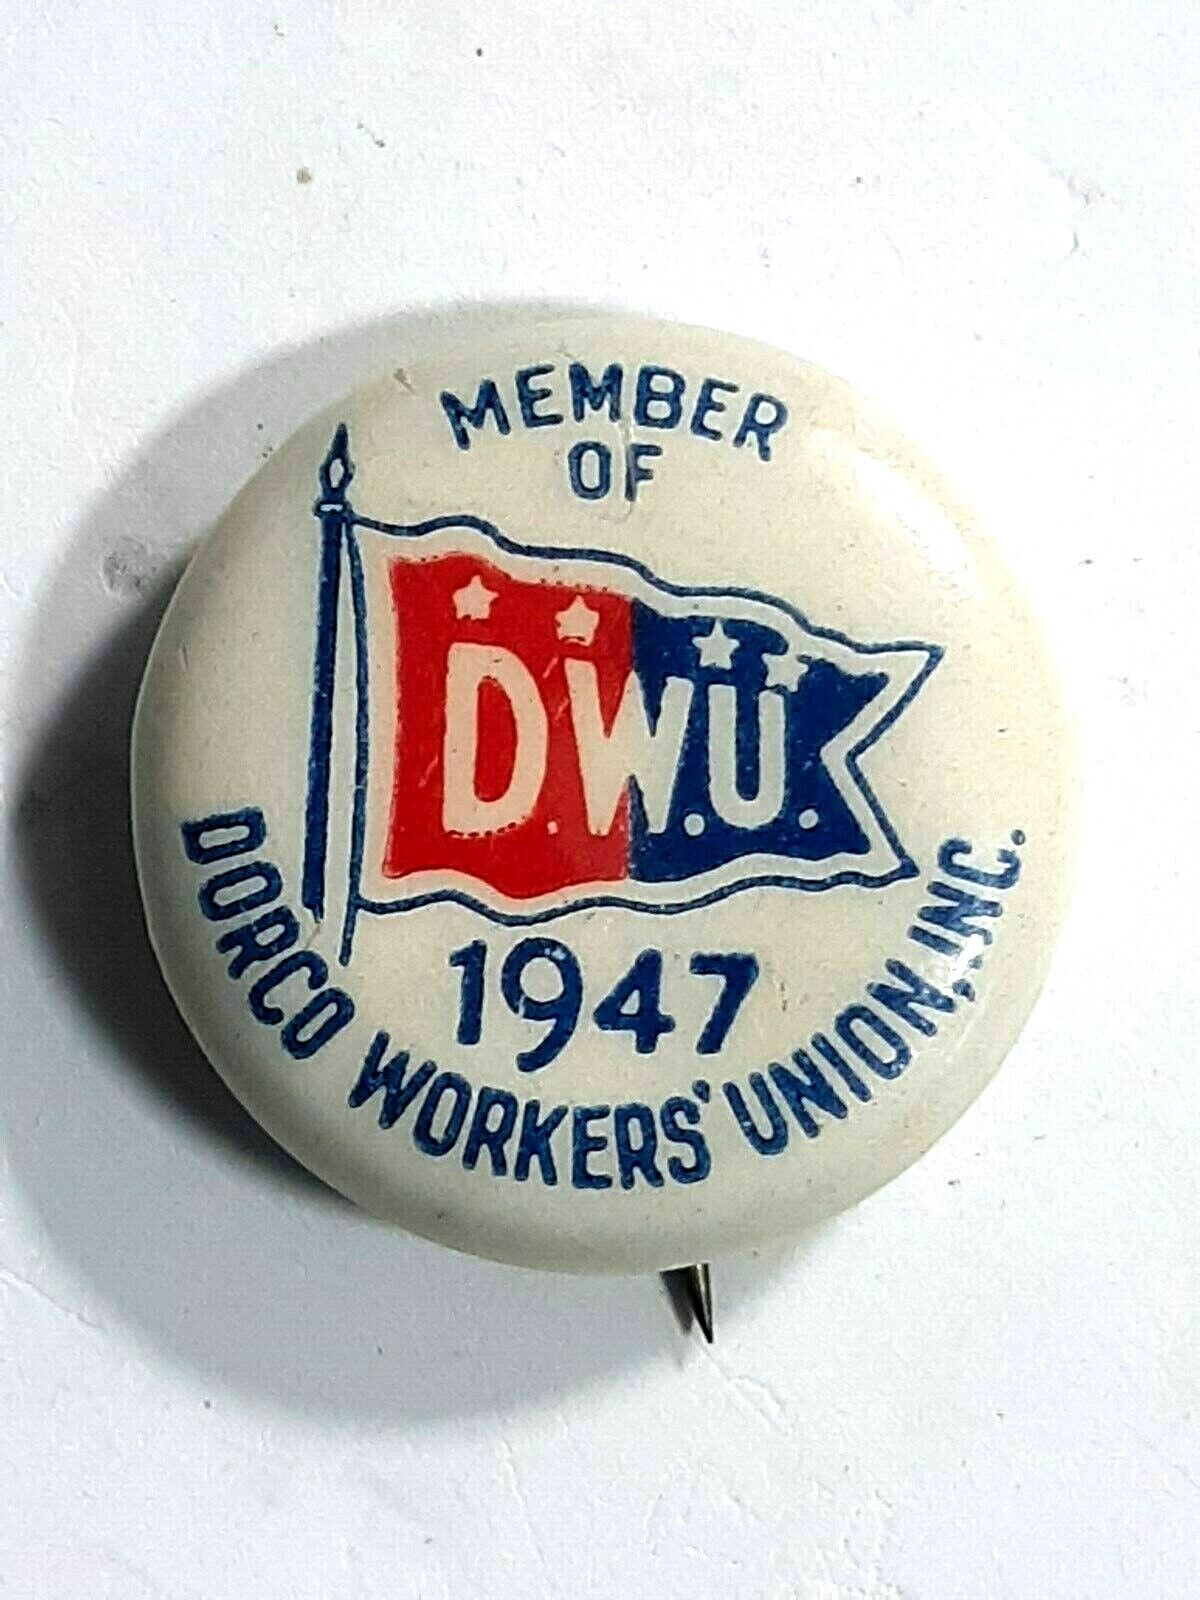 Vintage 1947 Member of DORCO WORKERS UNION INC.  DWU